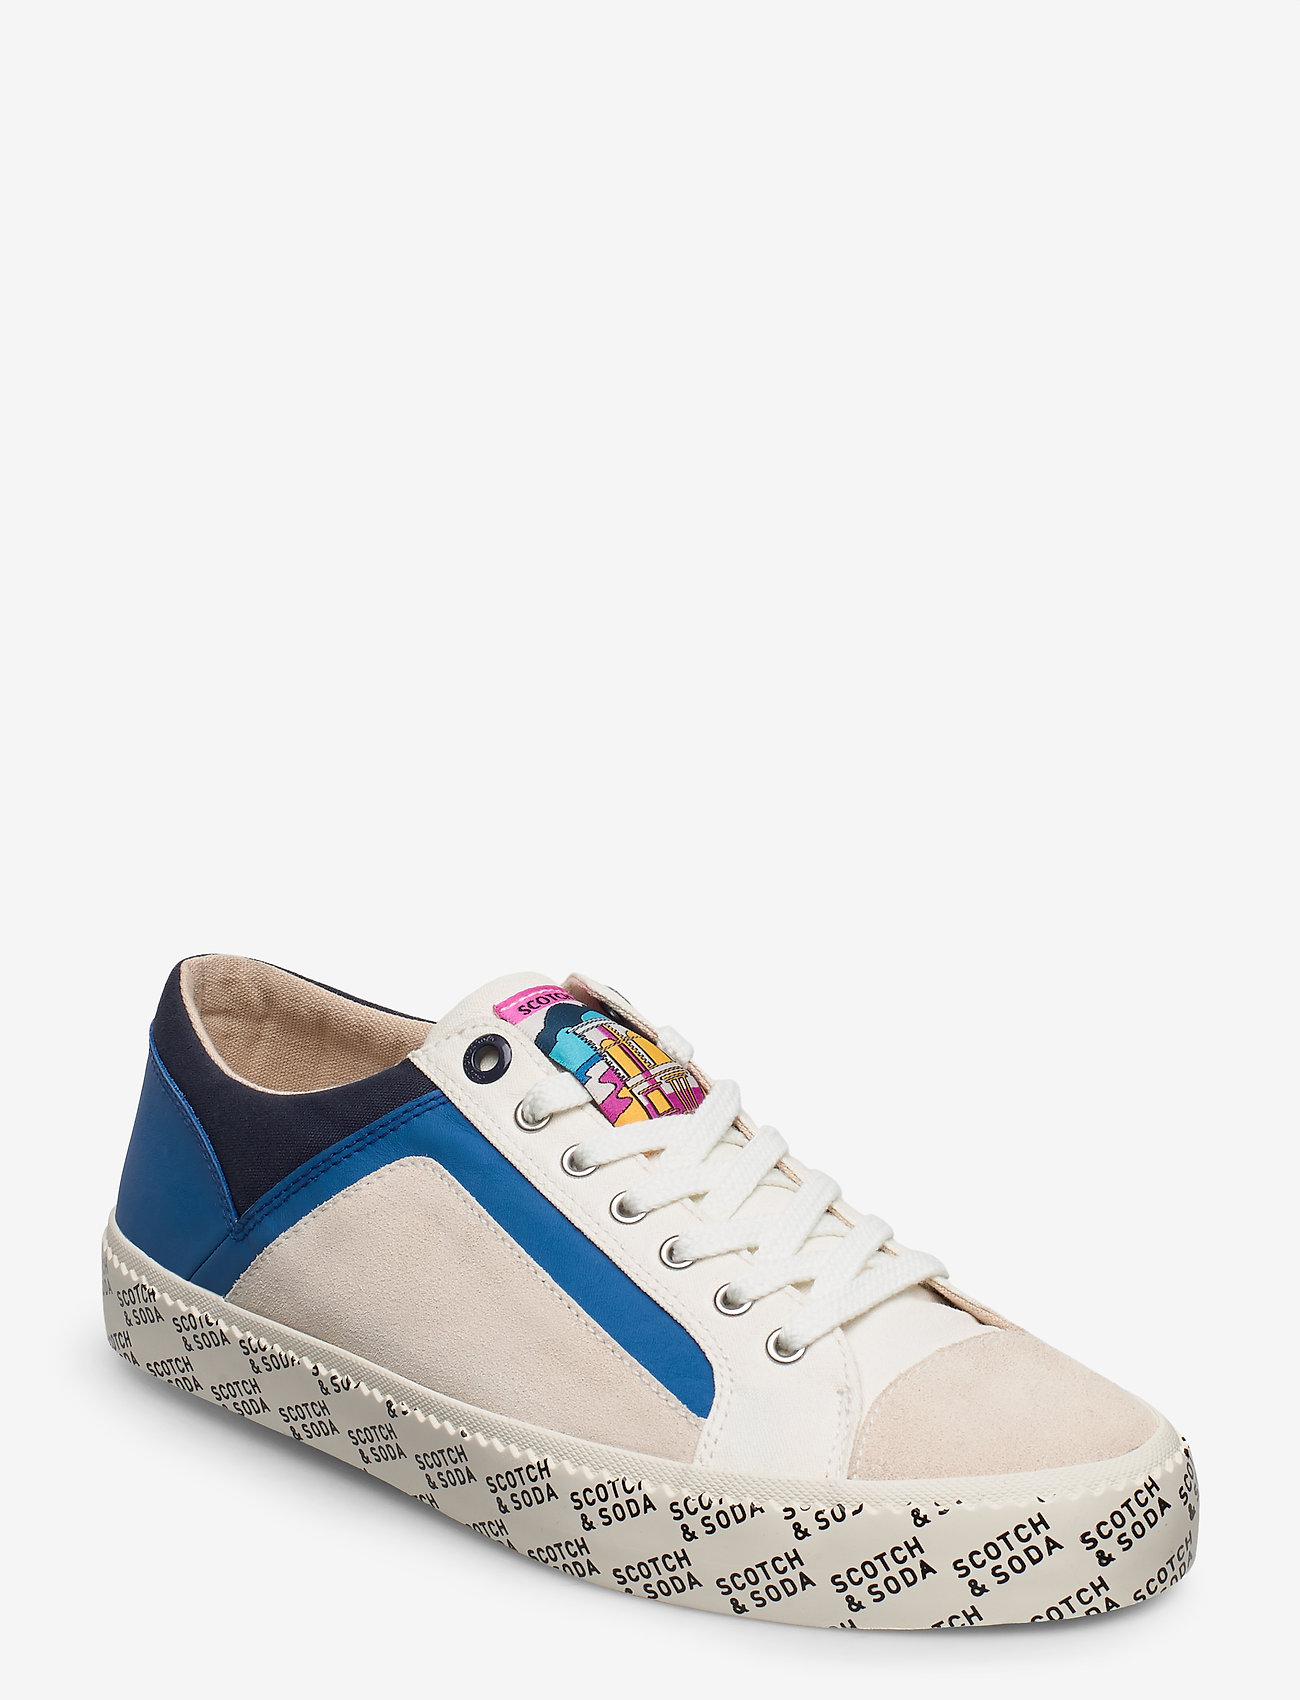 scotch and soda sneakers